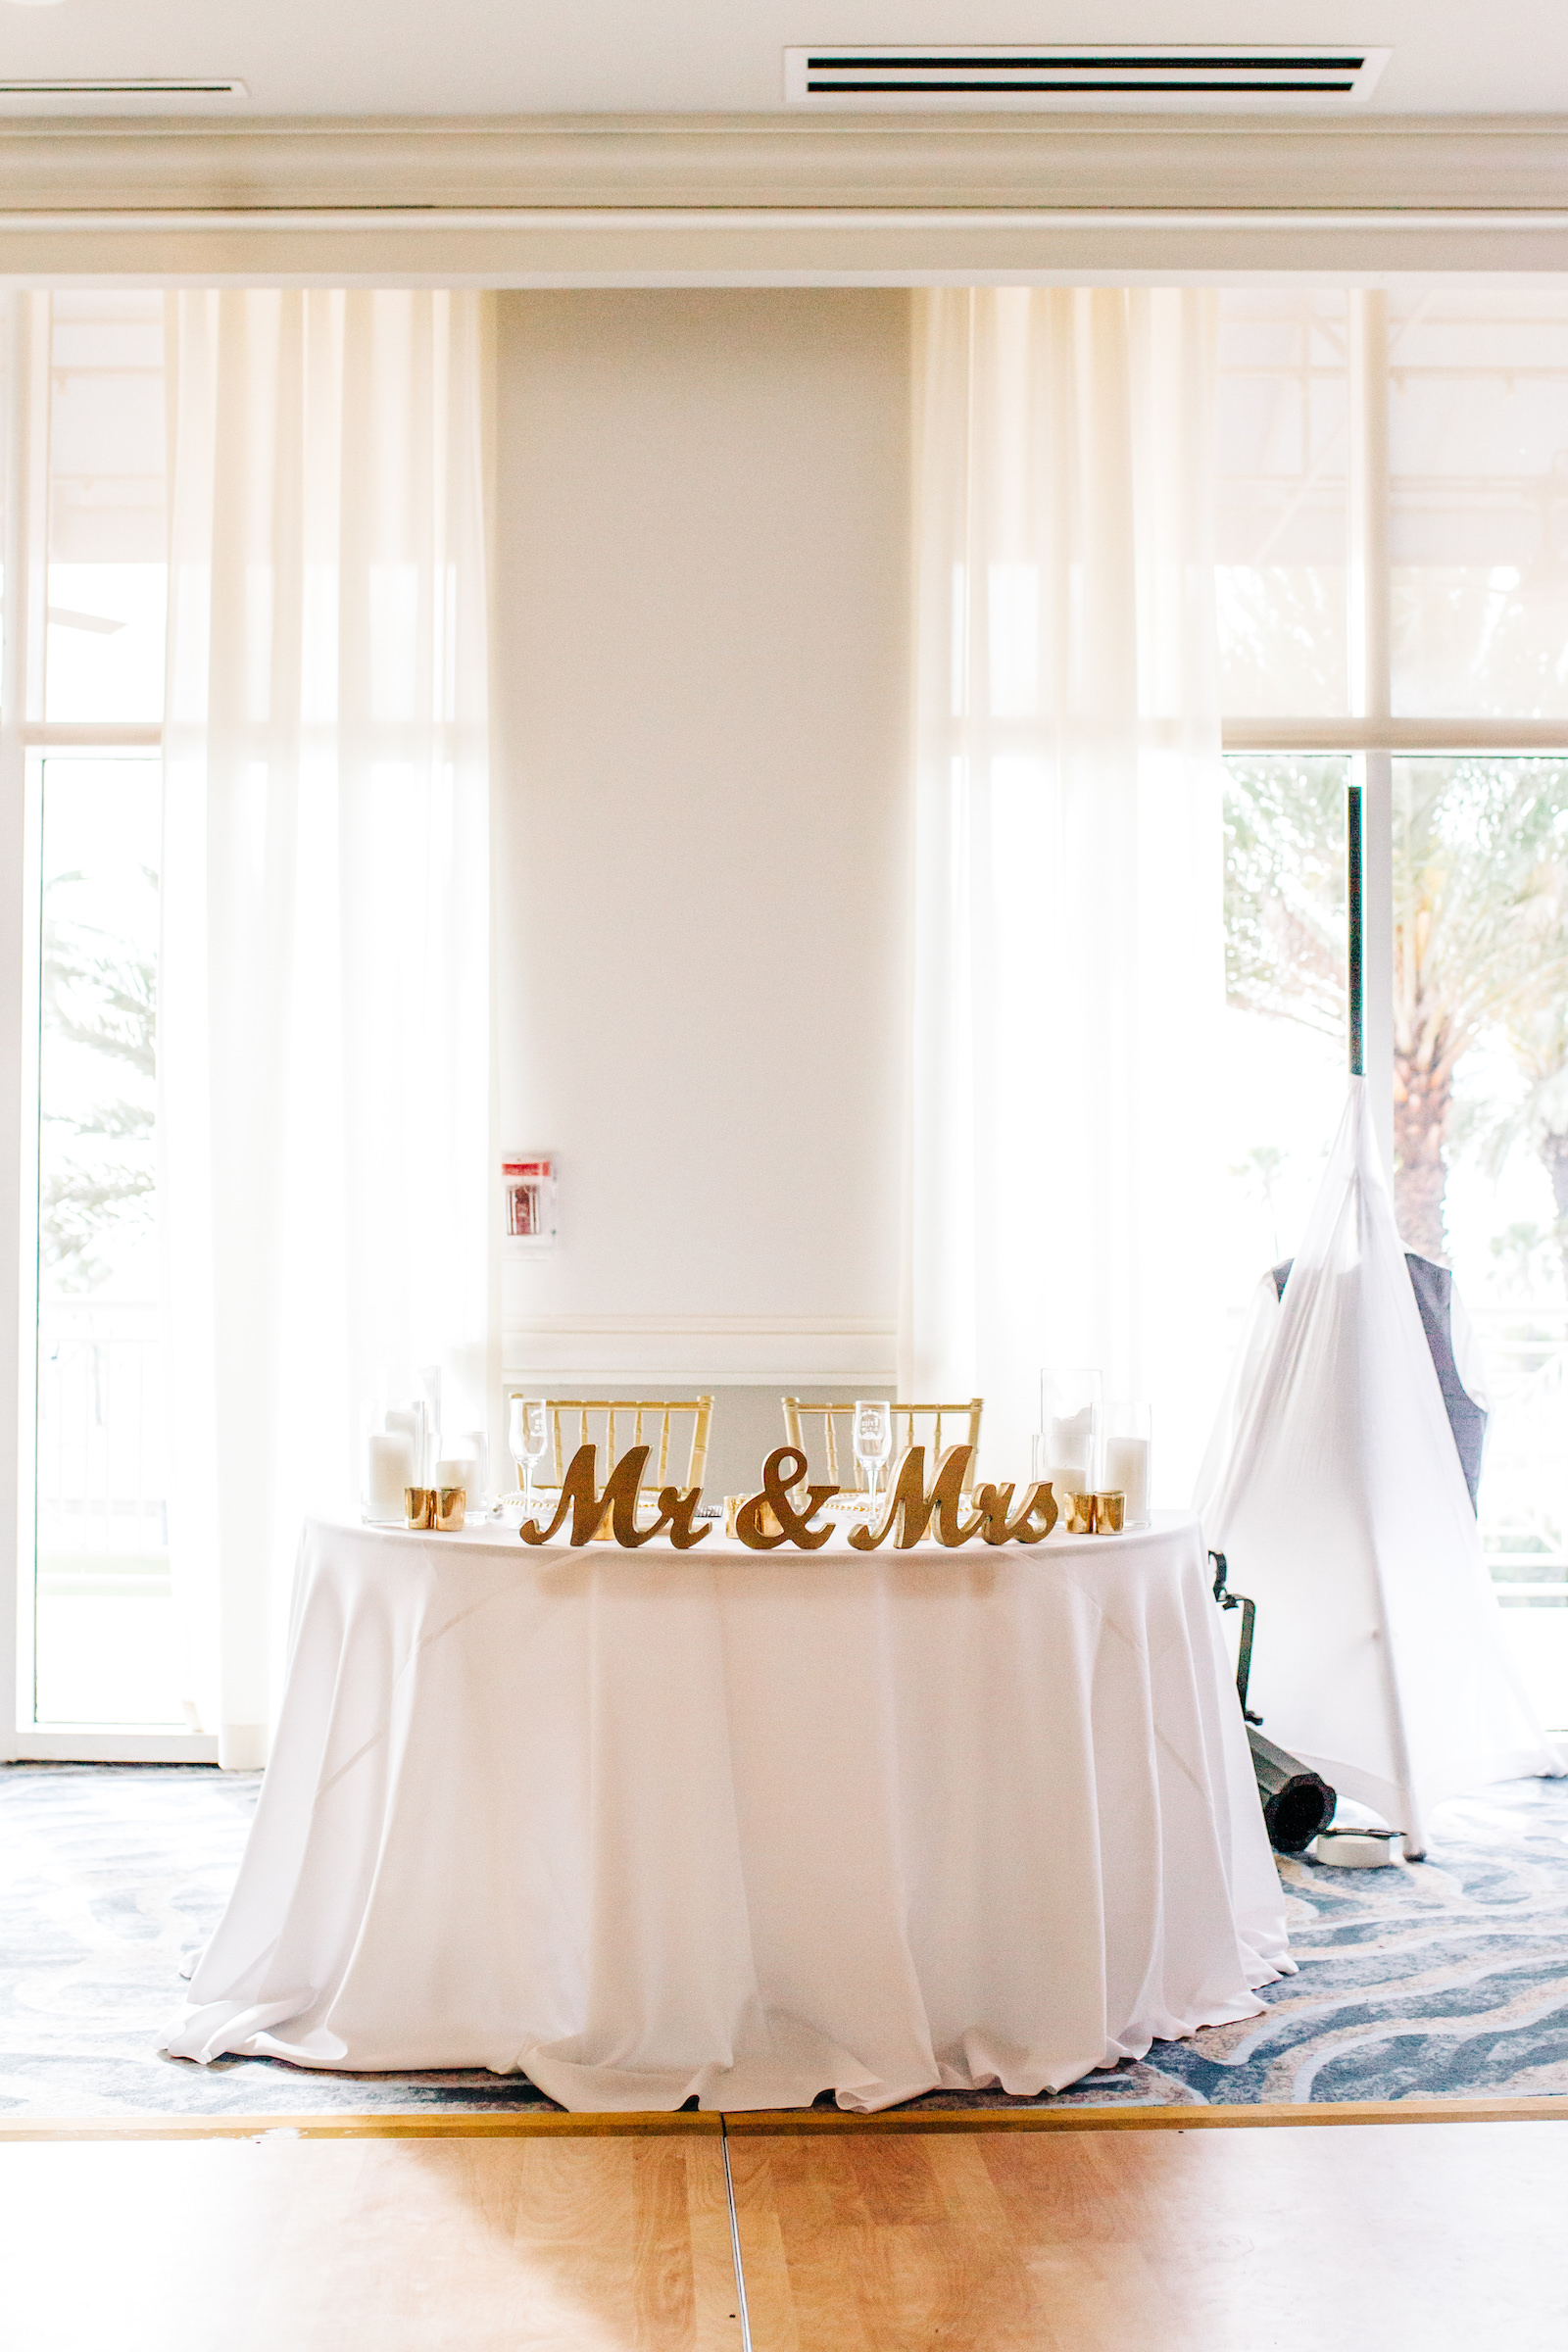 Florida Modern Minimal Wedding Reception and Decor, Sweetheart Table with Gold Mr. and Mrs. Table Letters | Clearwater Beach Wedding Planner Special Moments Event Planning | Florida Wedding Venue and Resort Hyatt Regency Clearwater Beach, Bellaire Ballroom